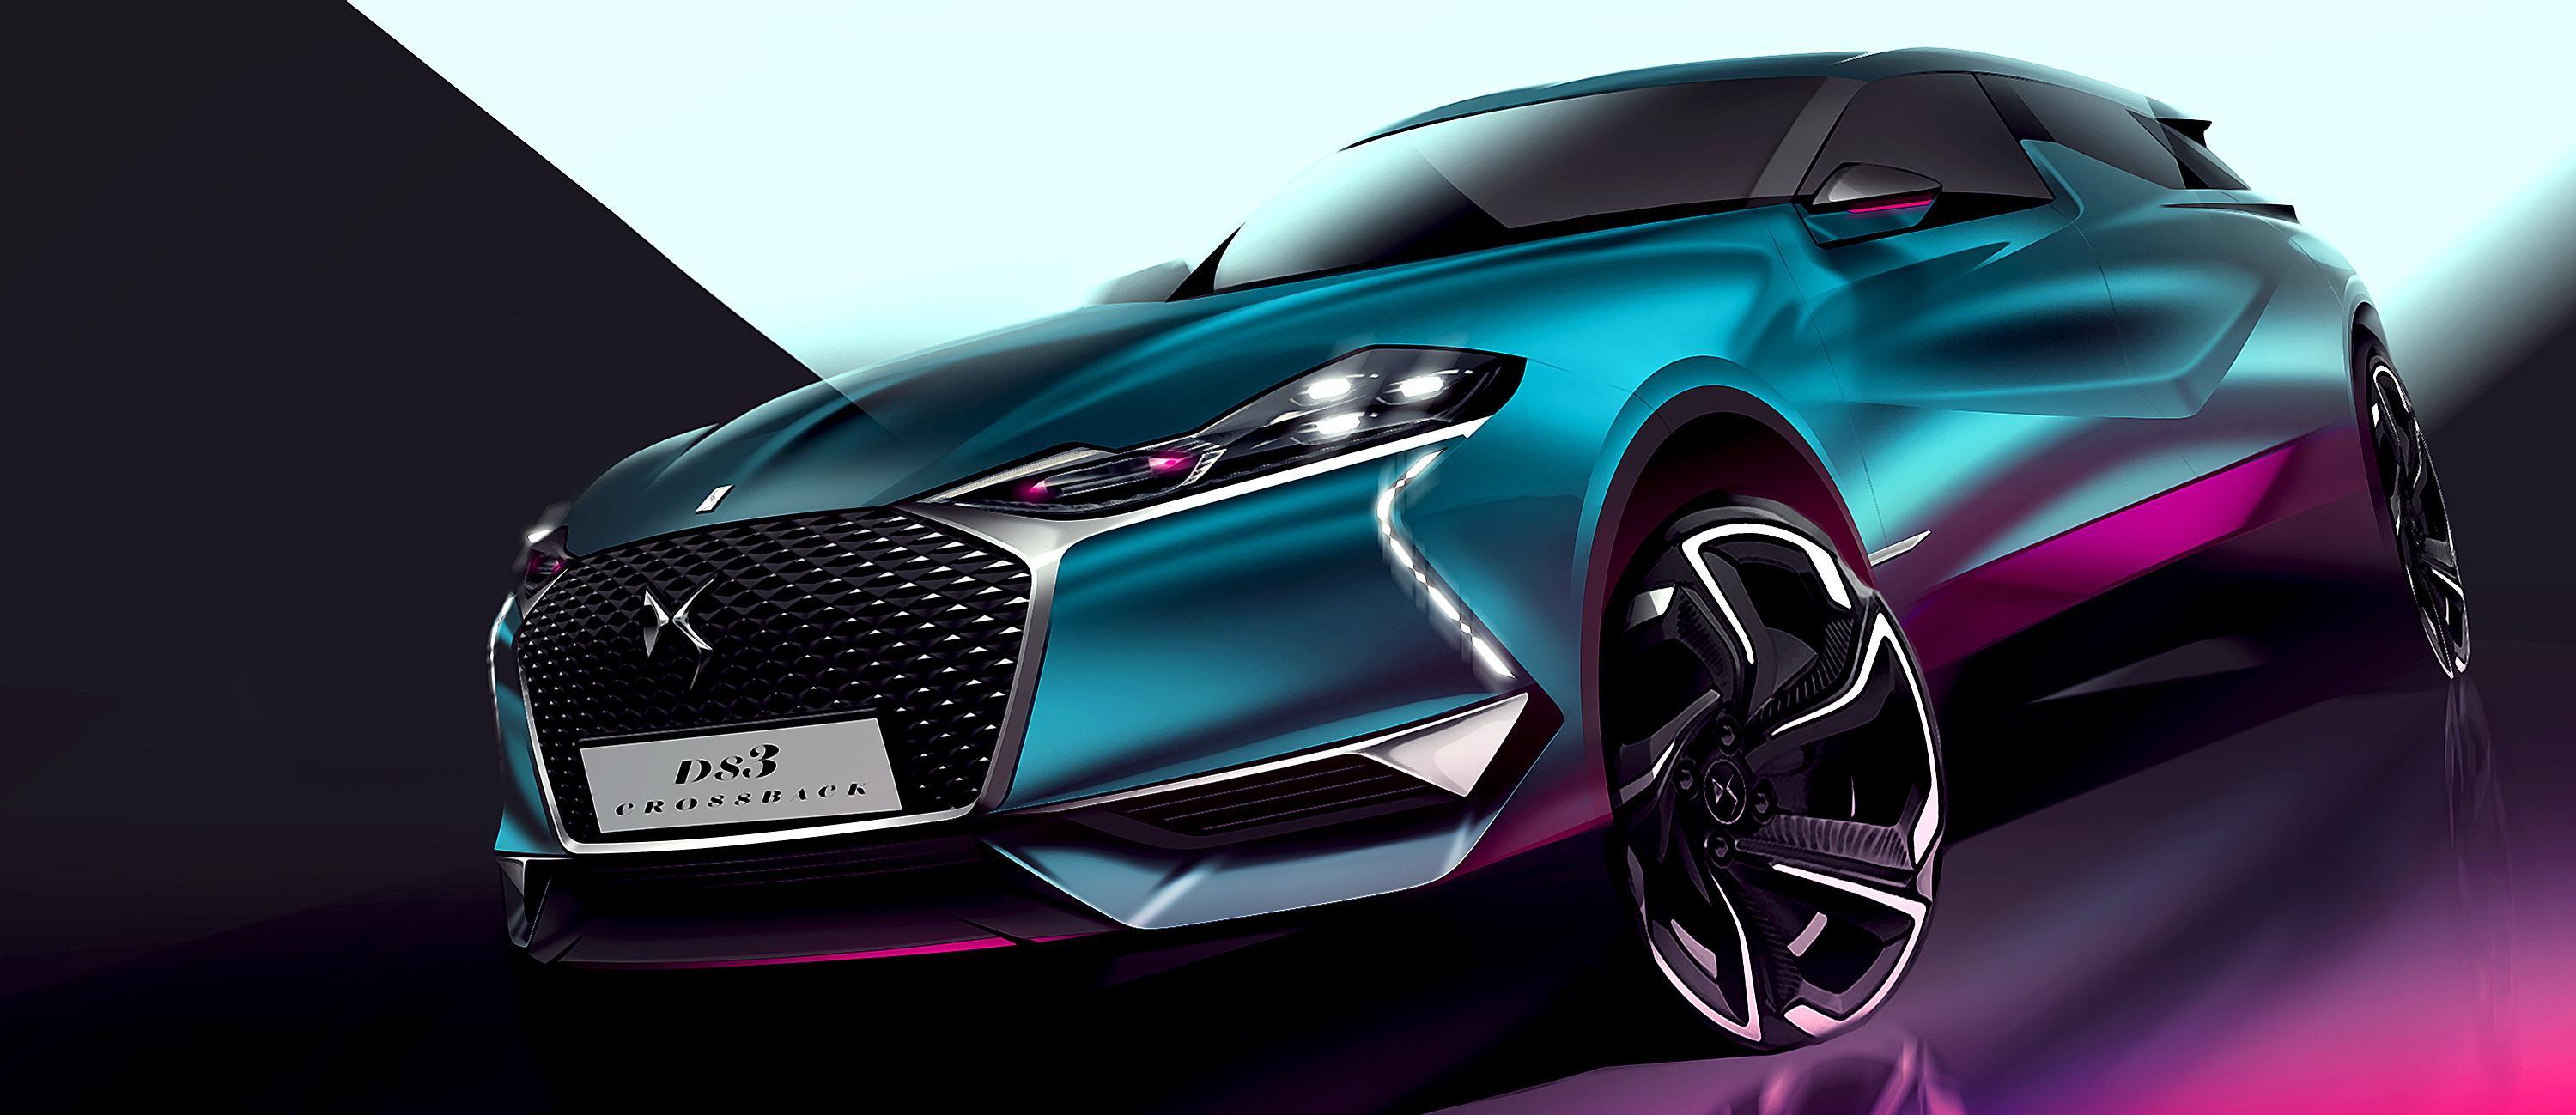 DS 3 Crossback quality free high resolution car